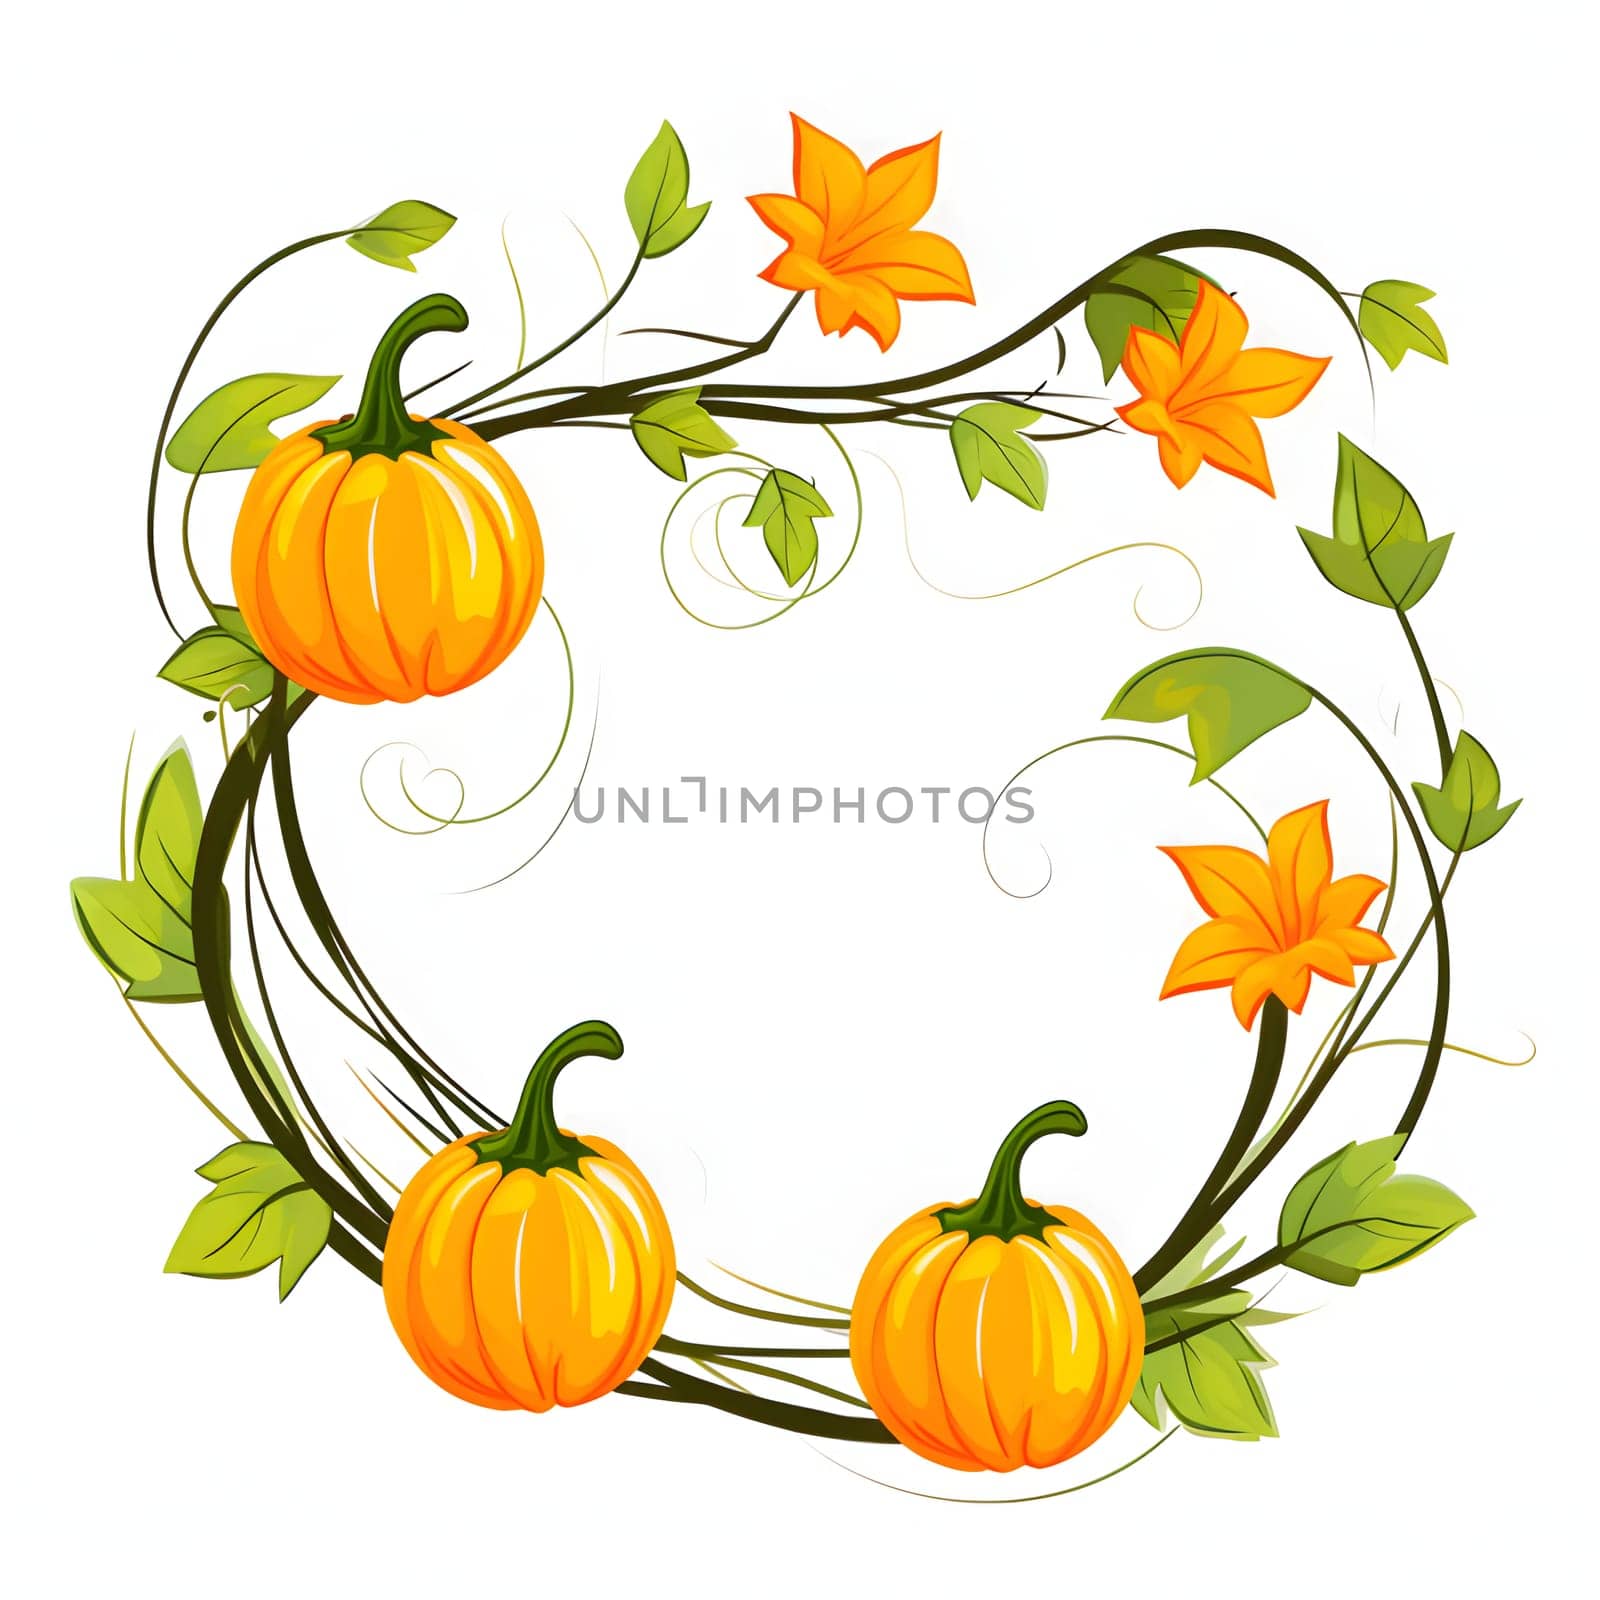 Circular frame with leaves and pumpkins on a light background. by ThemesS